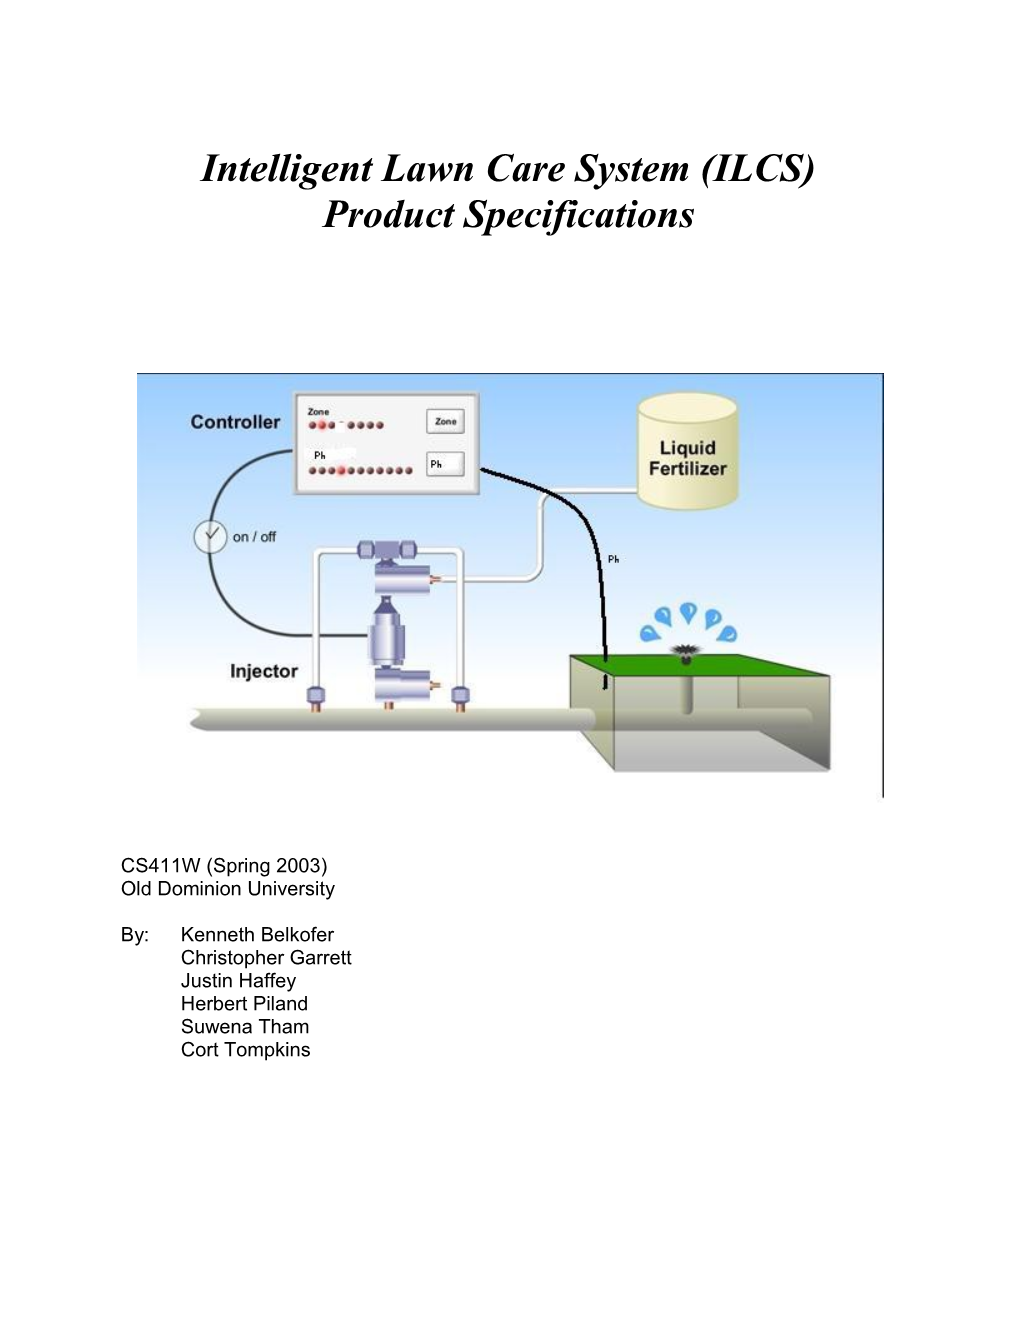 Intelligent Lawn Care System (ILCS) Product Specifications